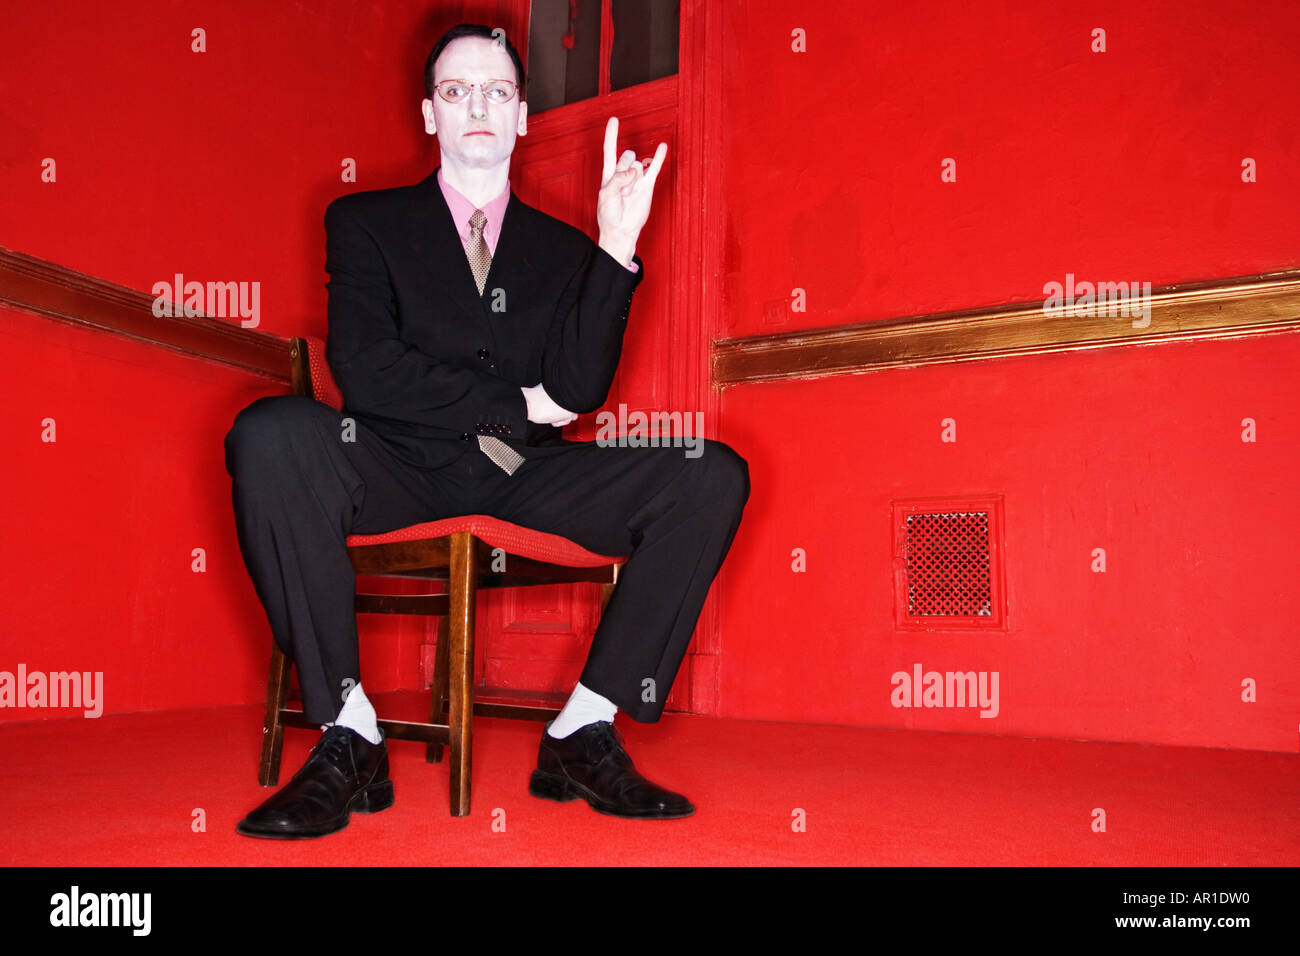 indoor room wall walls door red man 40 45 mature vampire dark haired suit chemise pink tie black business businessman whey fa Stock Photo